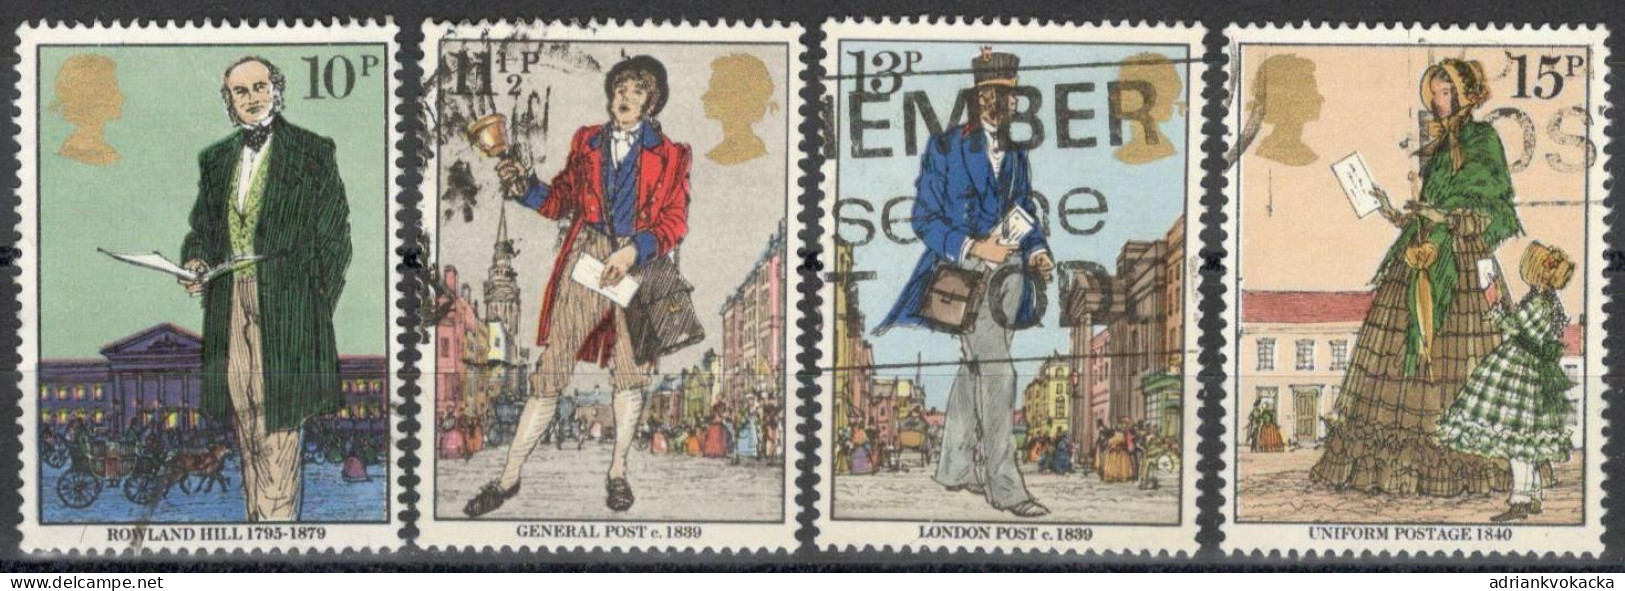 United Kingdom - Centenary Of The Death Of Sir Rowland Hill, Complete Series Of Cancelled Stamps Mi:GB 804-807 (1979) - Gebruikt